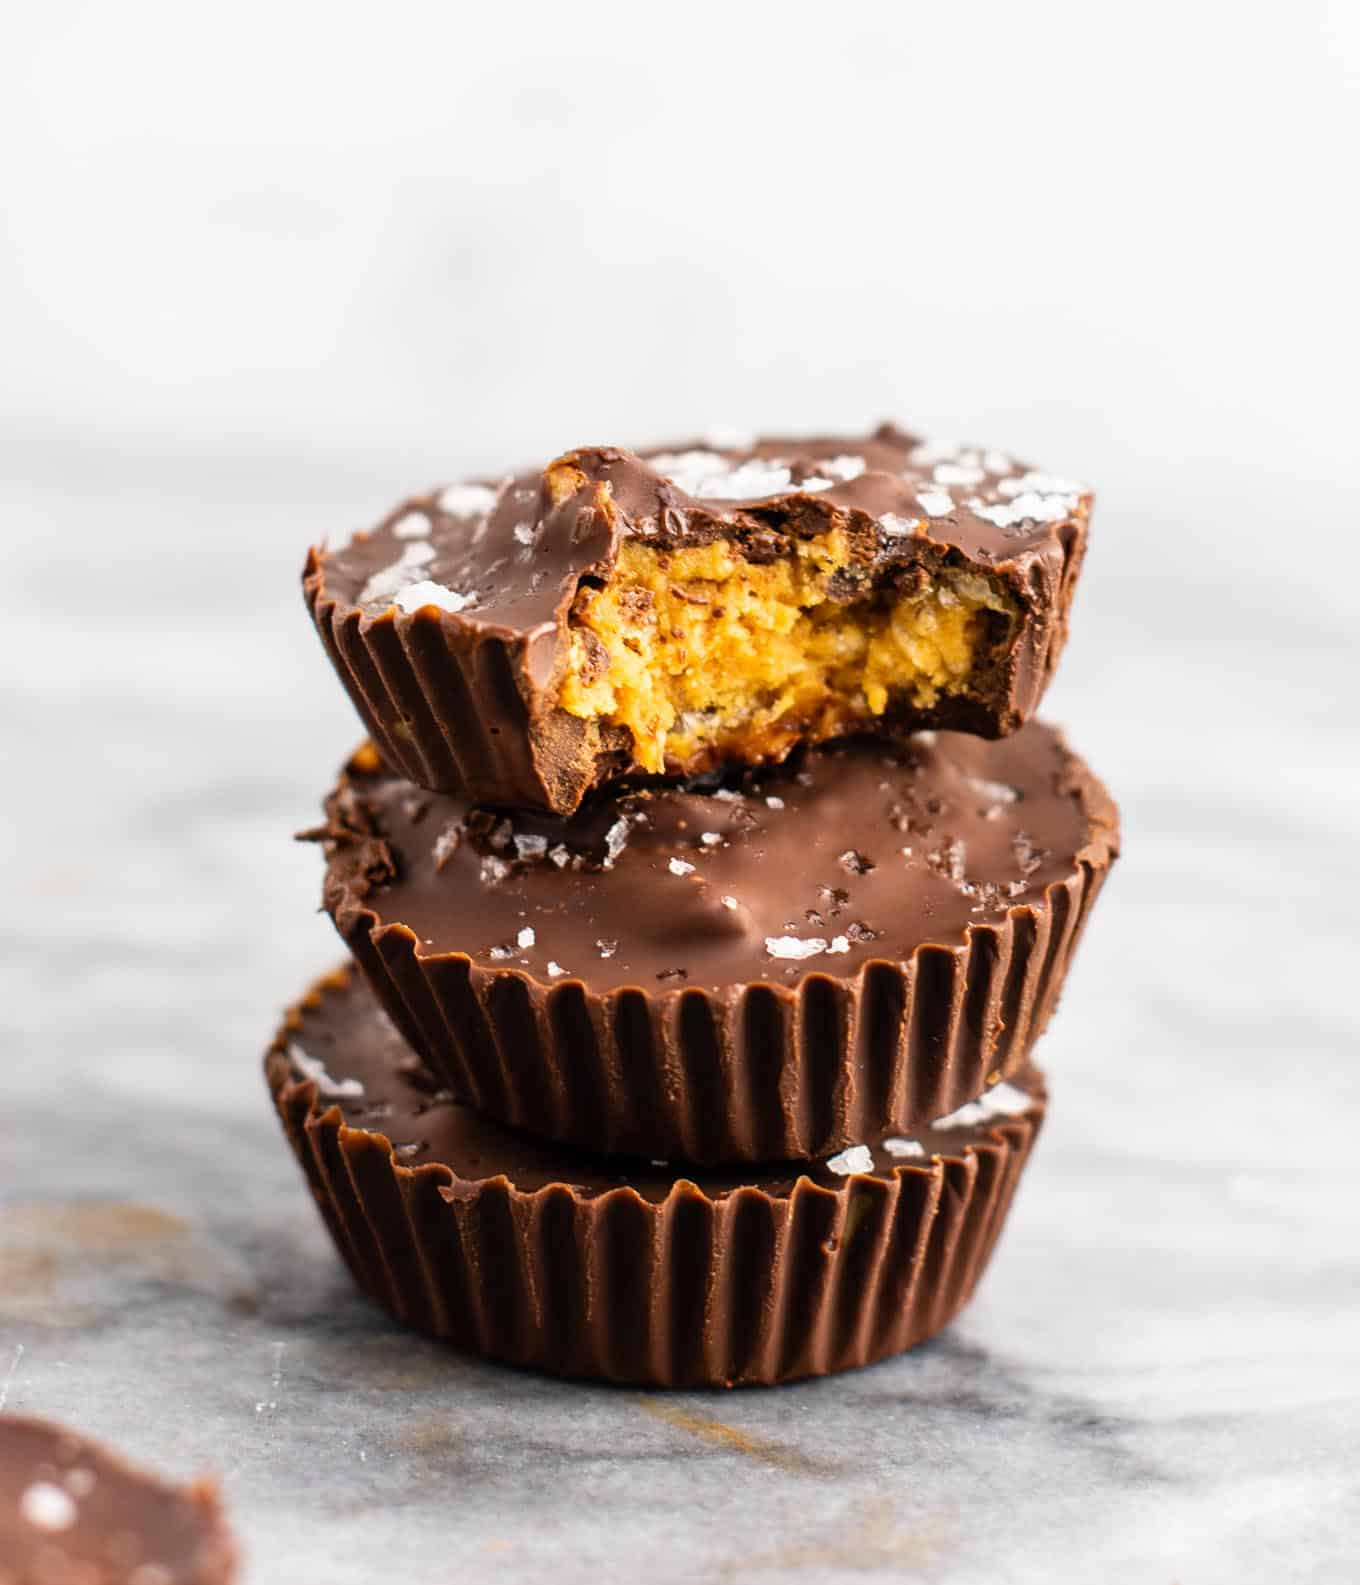 Chocolate peanut butter crunch cups with flaked sea salt – these are next level DELICIOUS! Vegan, gluten free, and tastes so good you won’t want to share! Perfect treat to keep in the freezer! #vegan #glutenfree #dessert #reesescups #vegandessert #glutenfreedessert #christmas #holidaytreat #seasalt